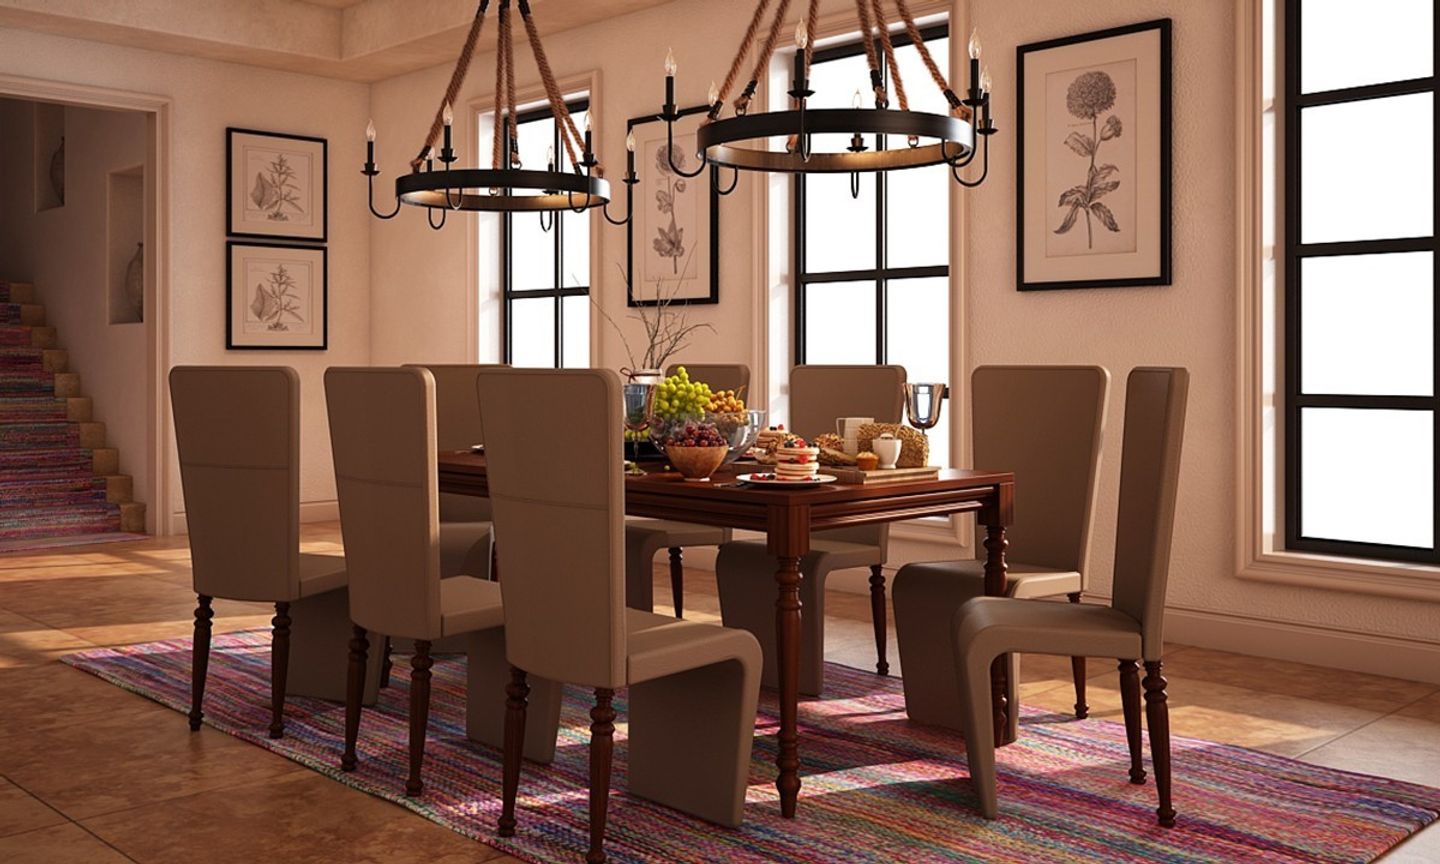 Classic 8-Seater Beige And Wood Dining Room Design With Faux Leather Chairs